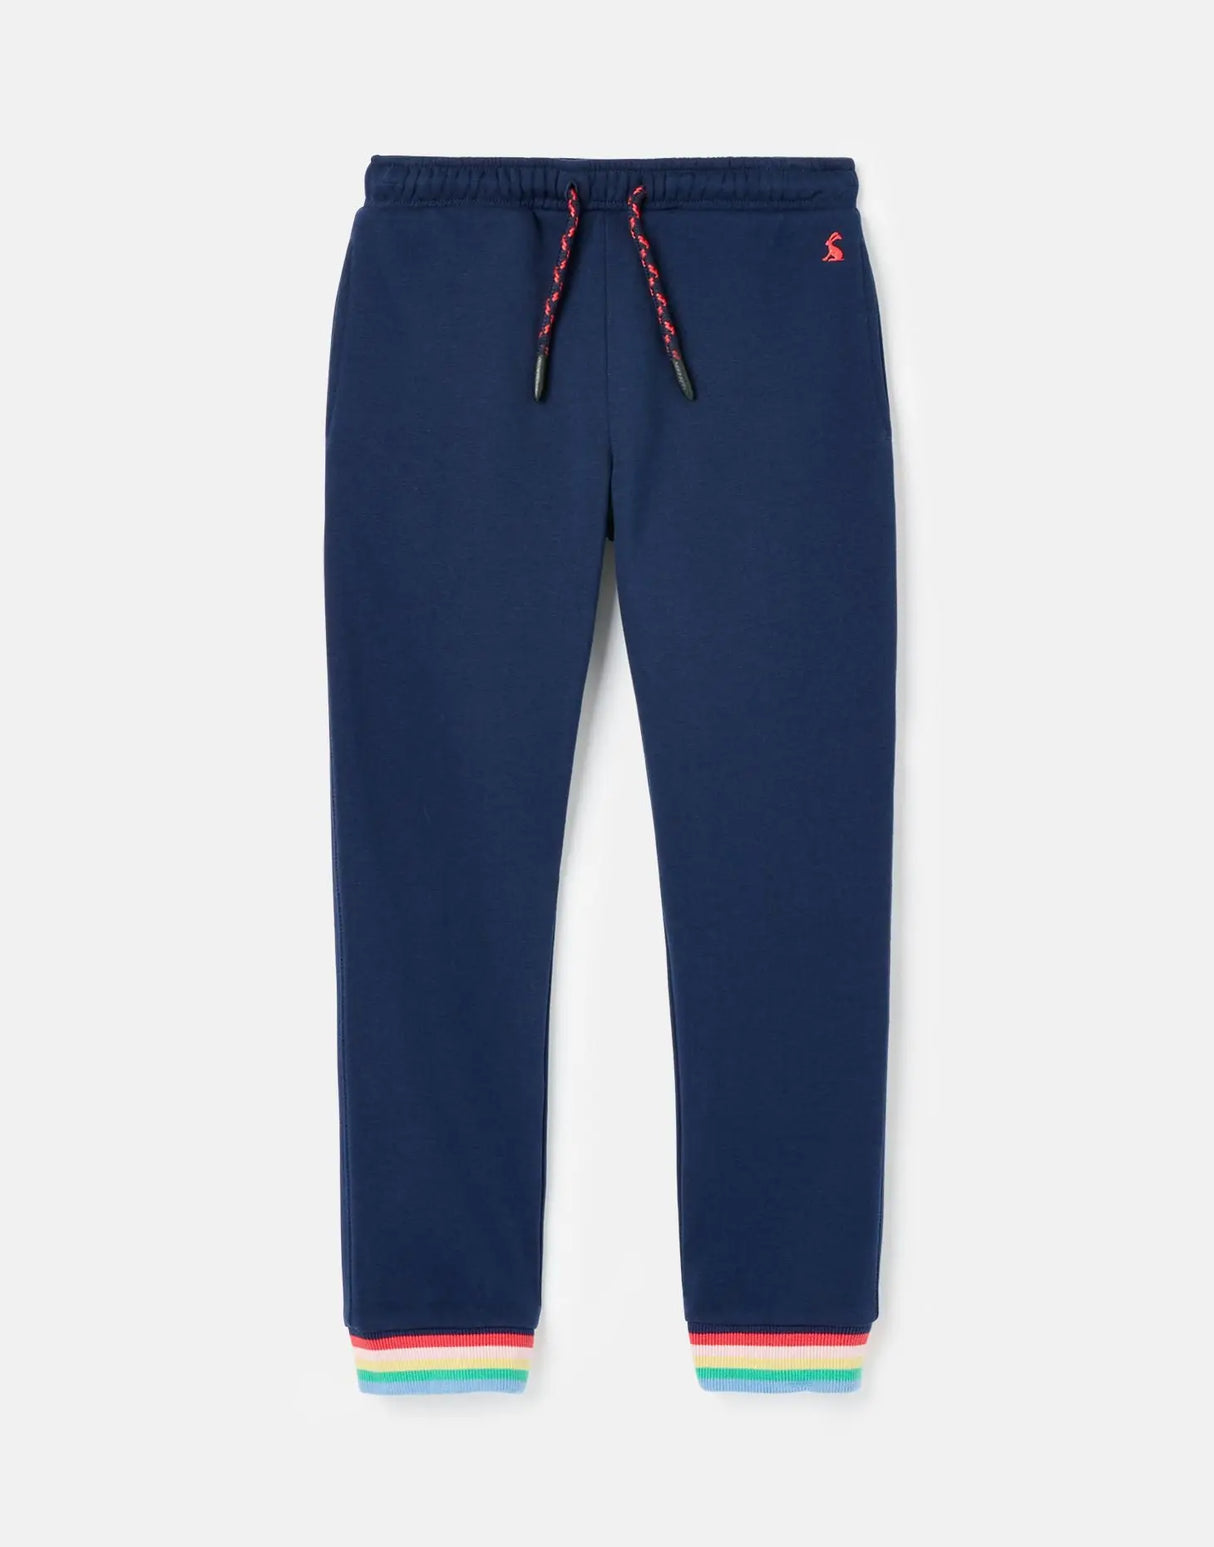 Girls' May Joggers | Joules - Joules